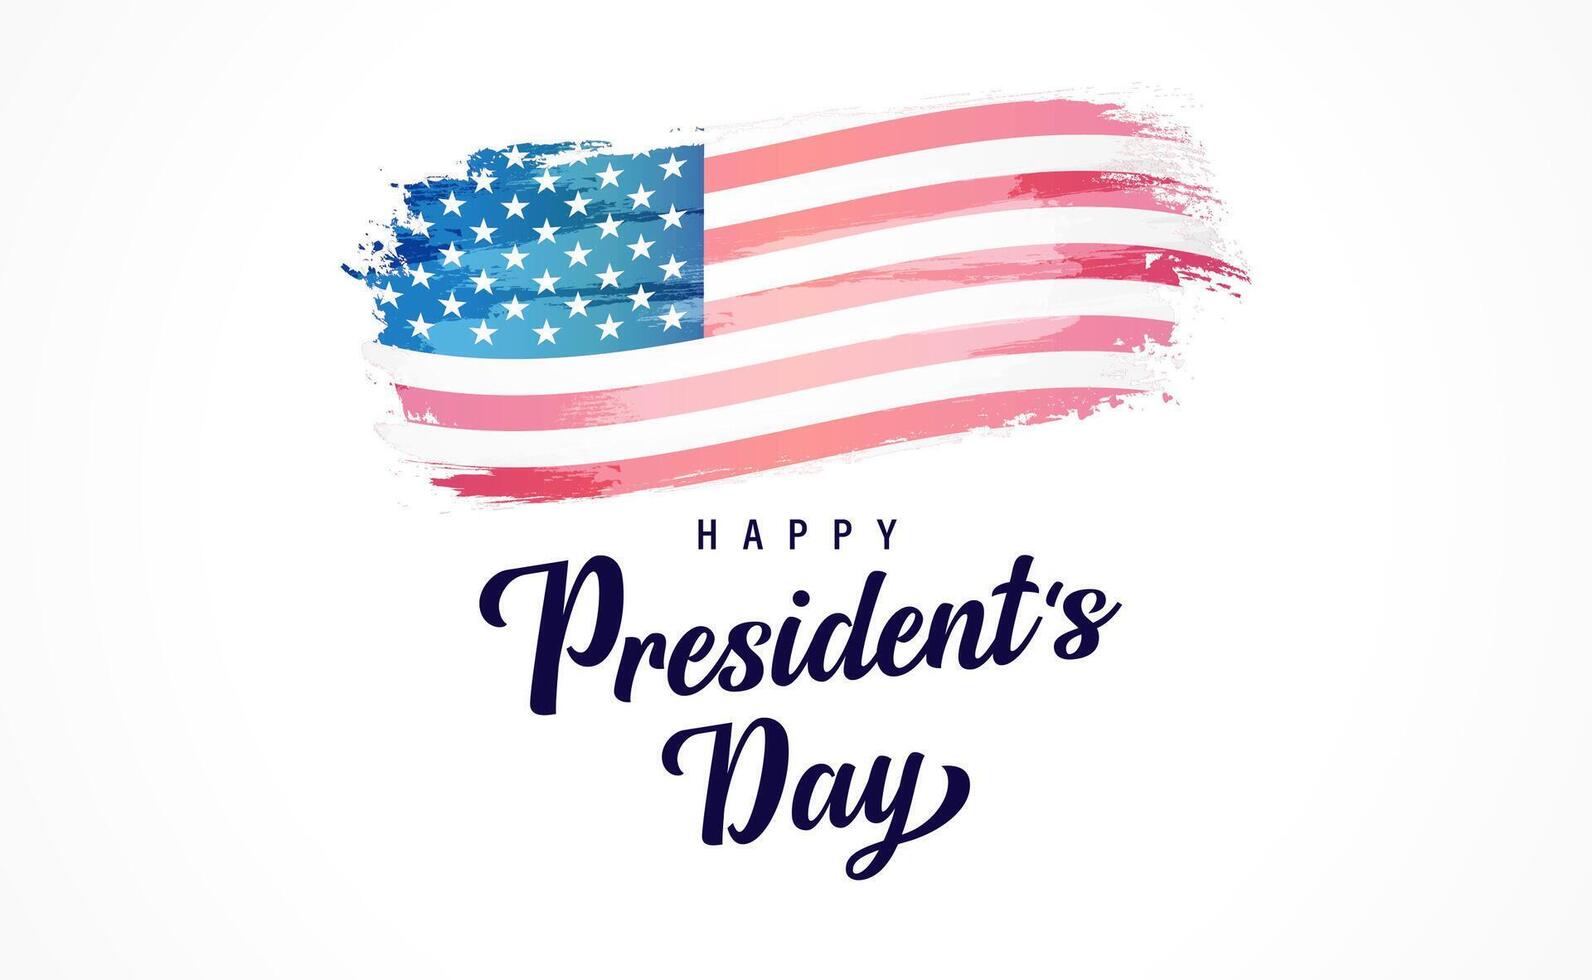 Happy President's Day greetings with watercolor style flag. vector